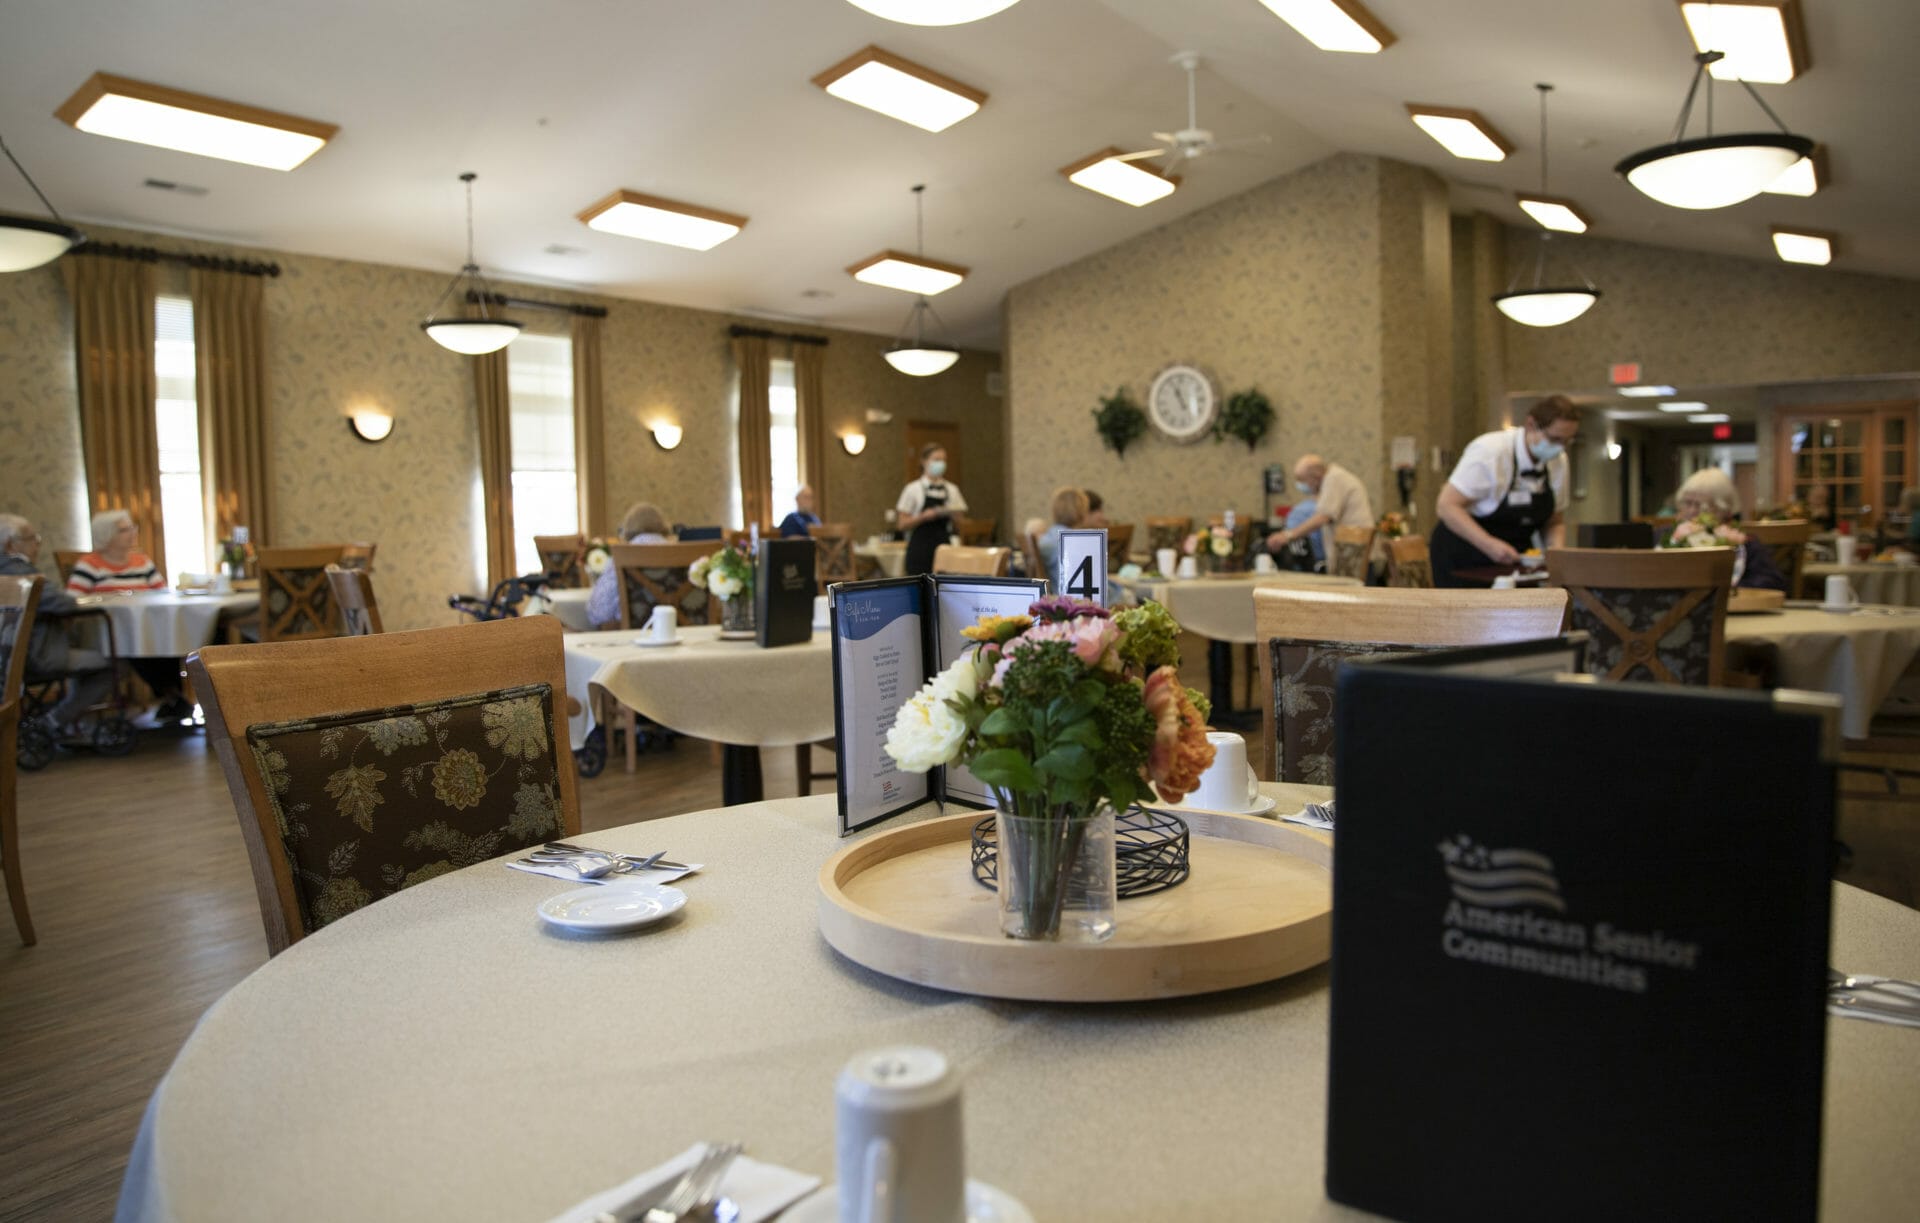 <span  class="uc_style_uc_tiles_grid_image_elementor_uc_items_attribute_title" style="color:#000000;">The Brownsburg Meadows Garden Homes Dining Room. </span>